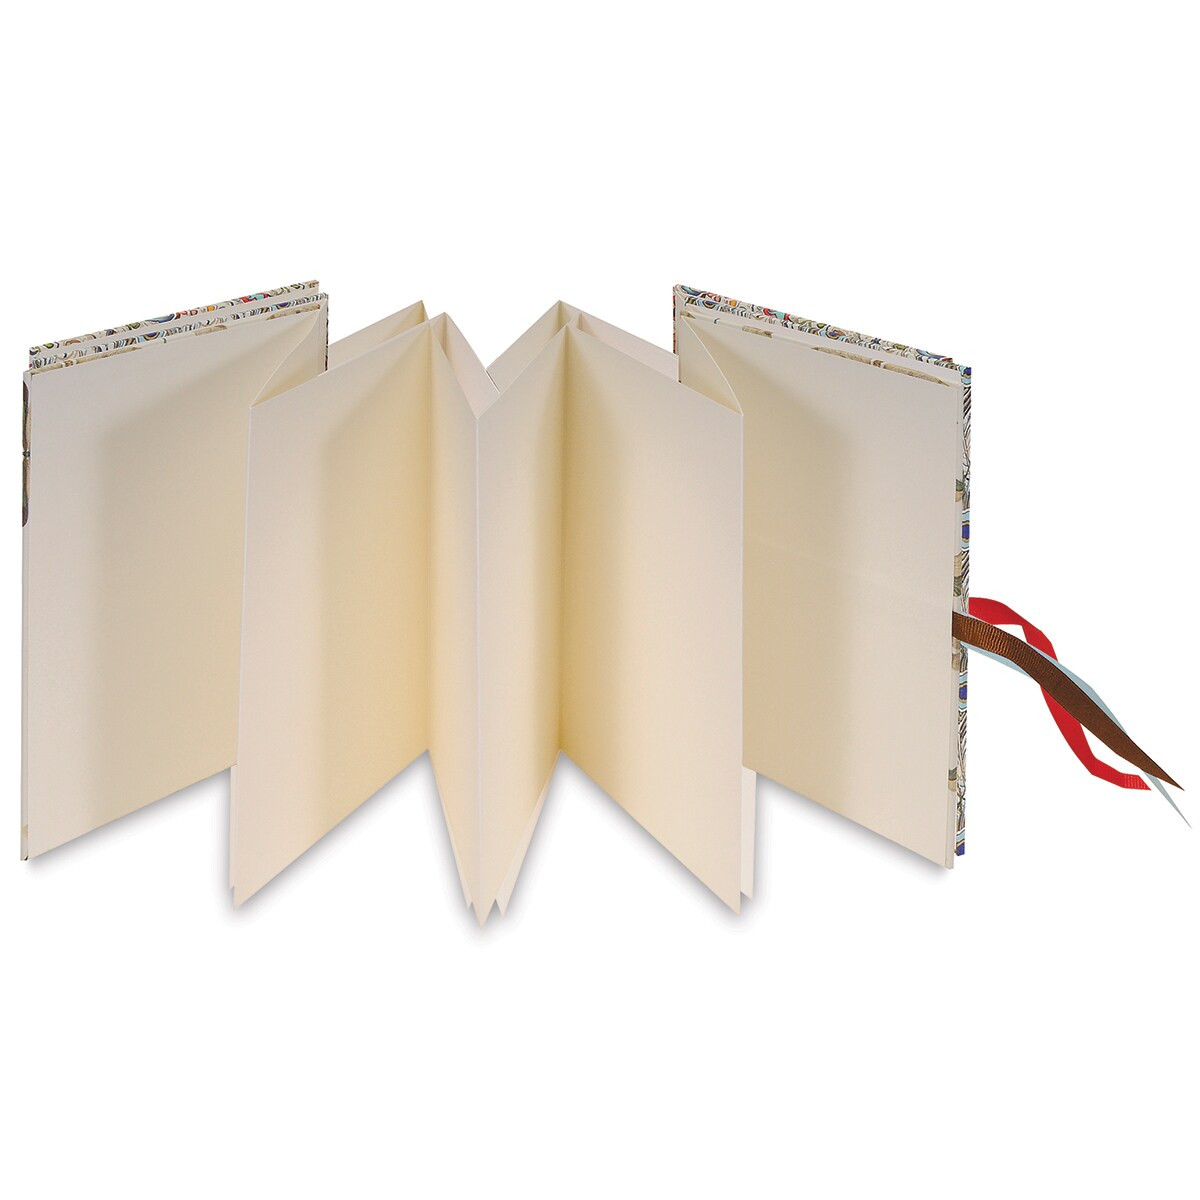 Books By Hand Accordion Book Kit